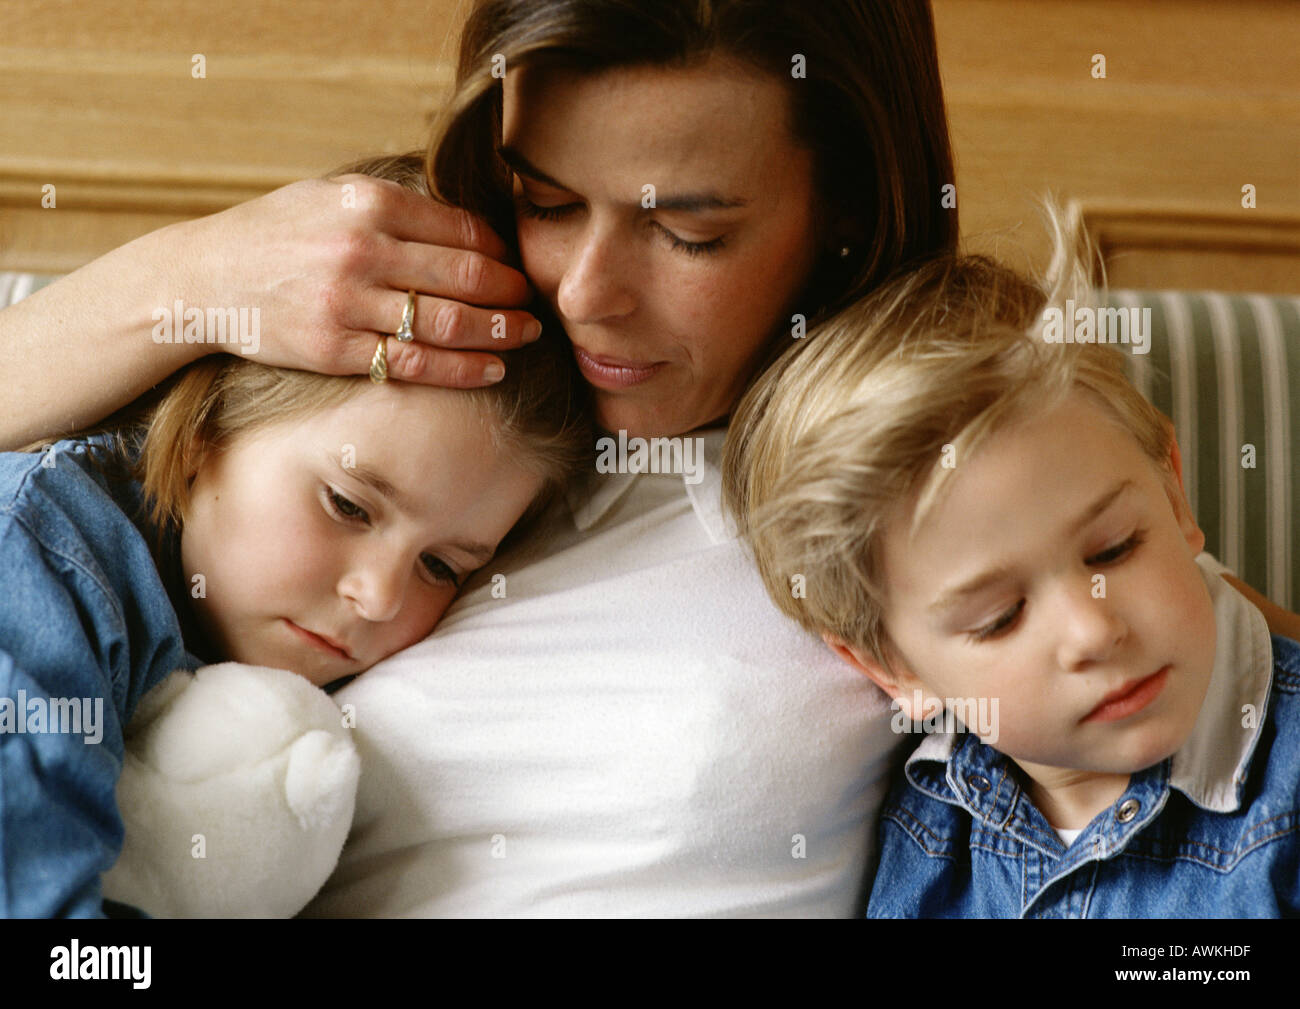 Woman between two children, holding little girl's head to her chest, little boy leaning against her, close-up Stock Photo